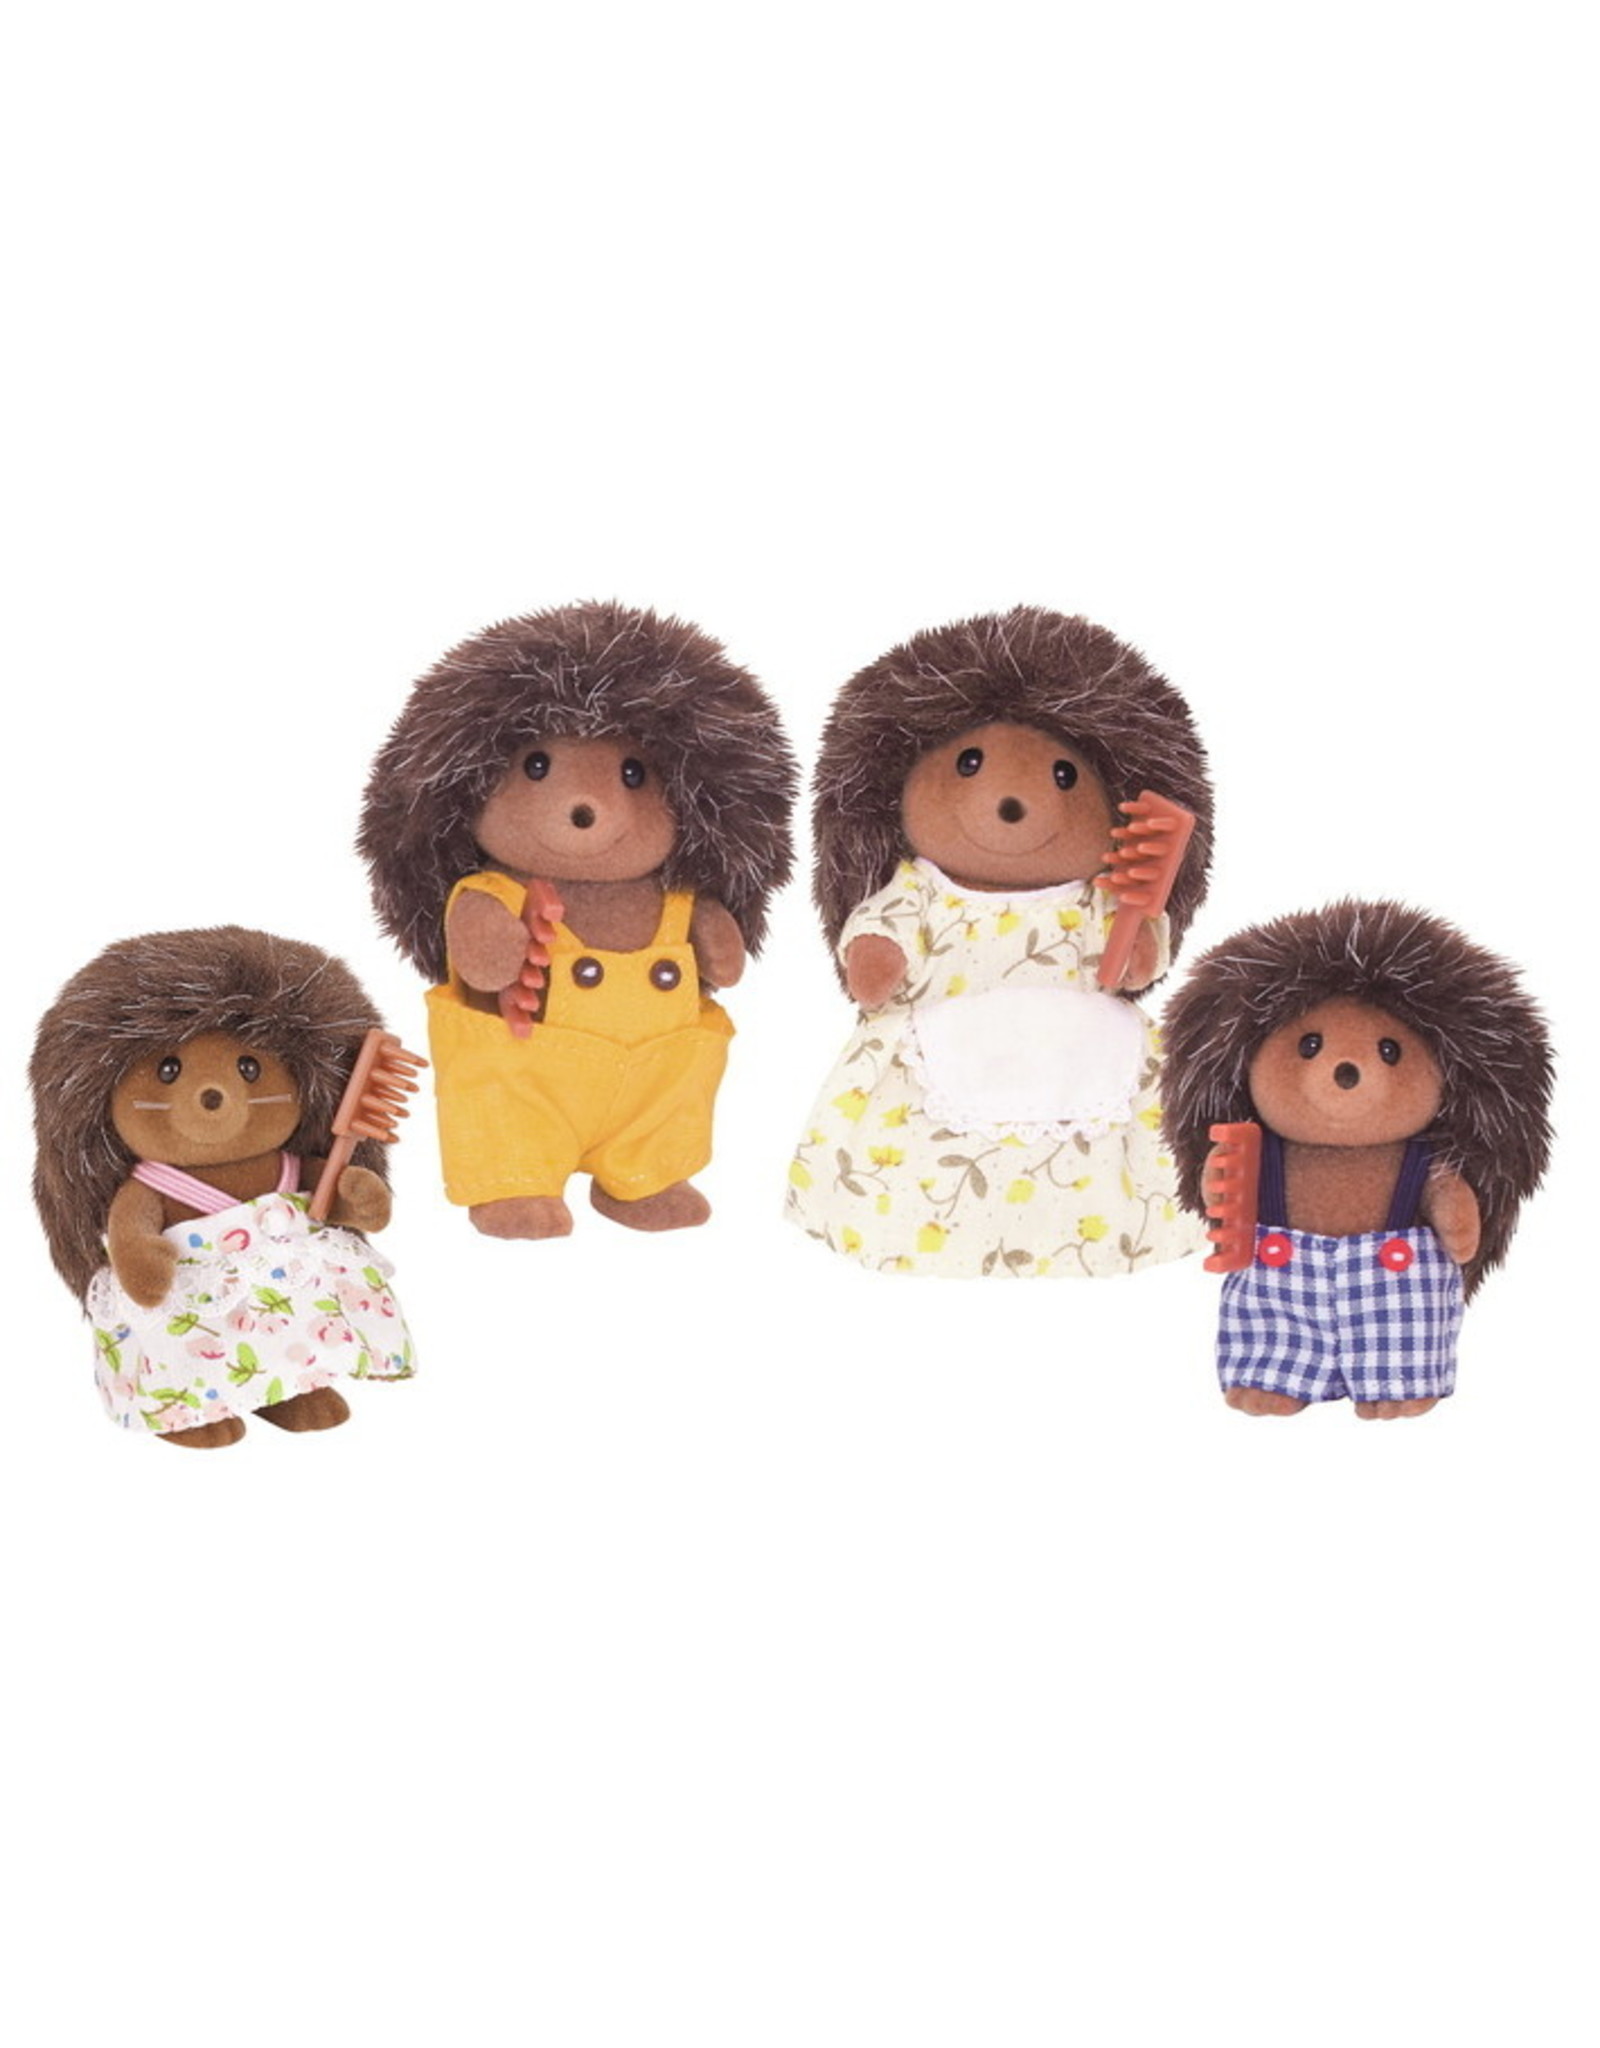 Calico Critters Calico Critters Pickleweed Hedgehog Family